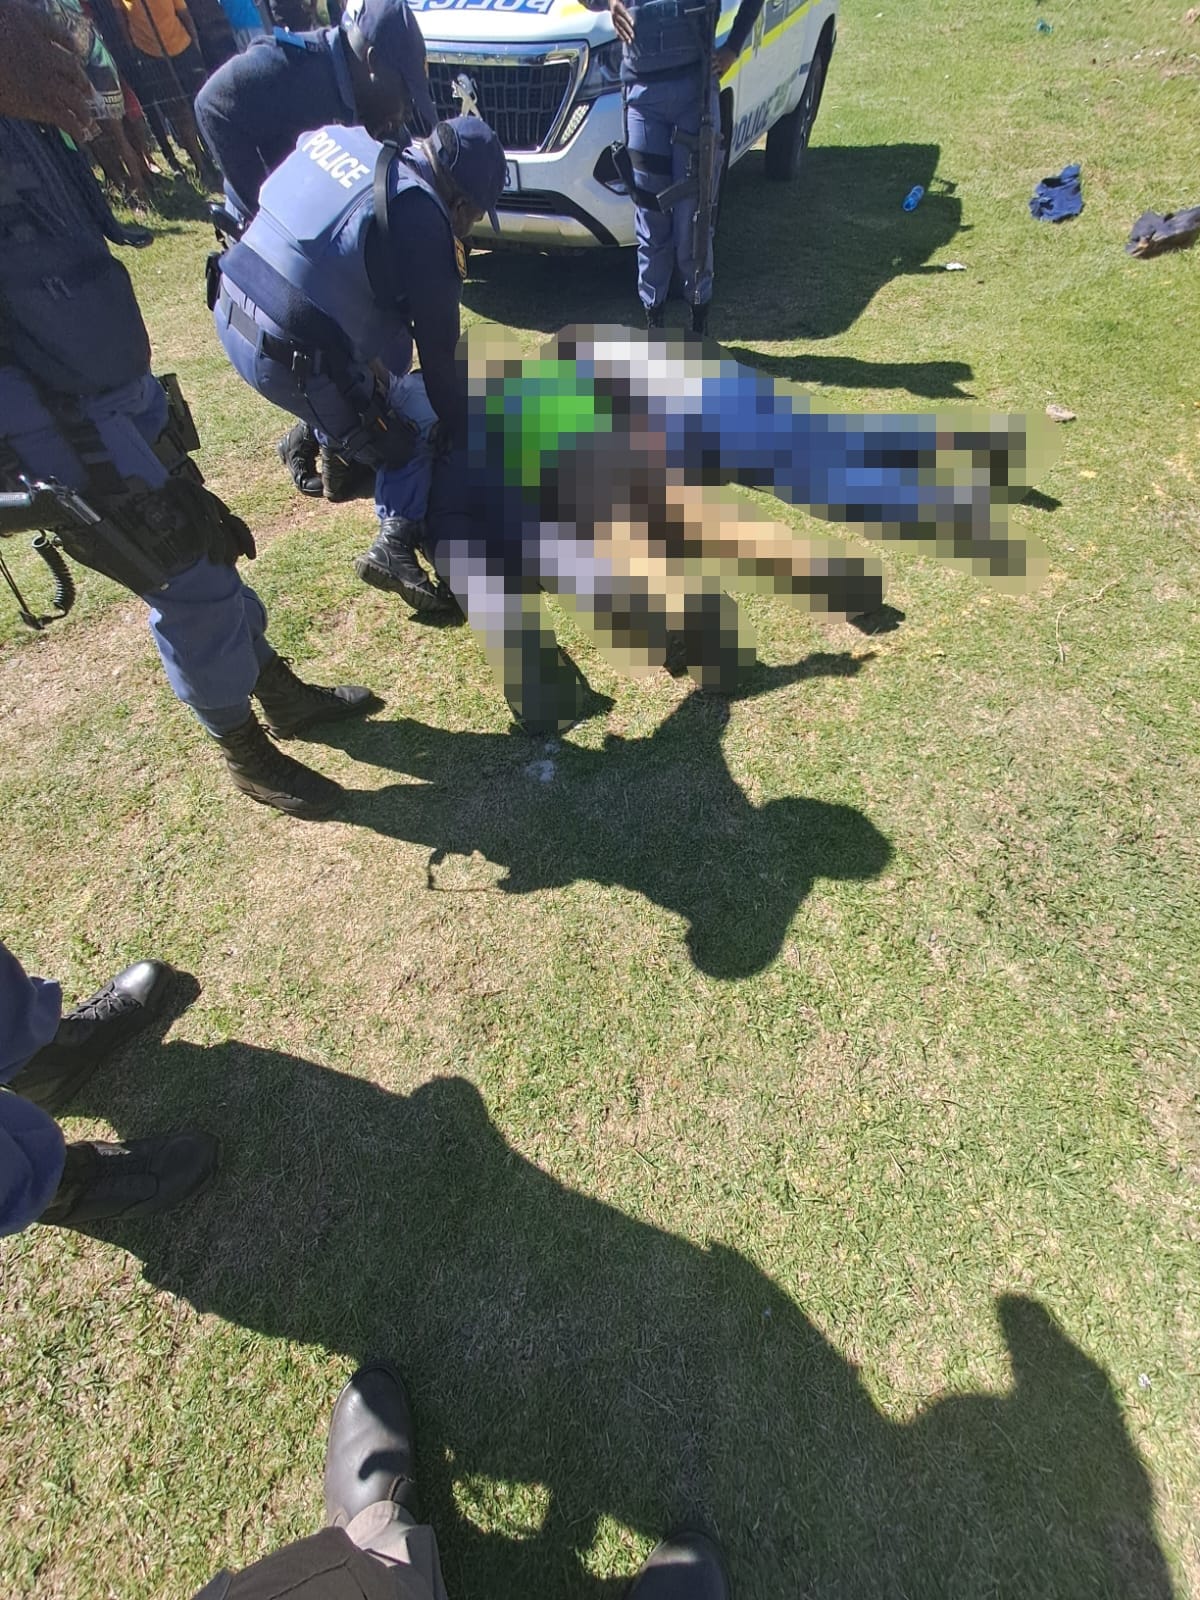 SAPS Vereeniging chased a vehicle that was involved in hijacking cases and house break-ins and arrested five suspects